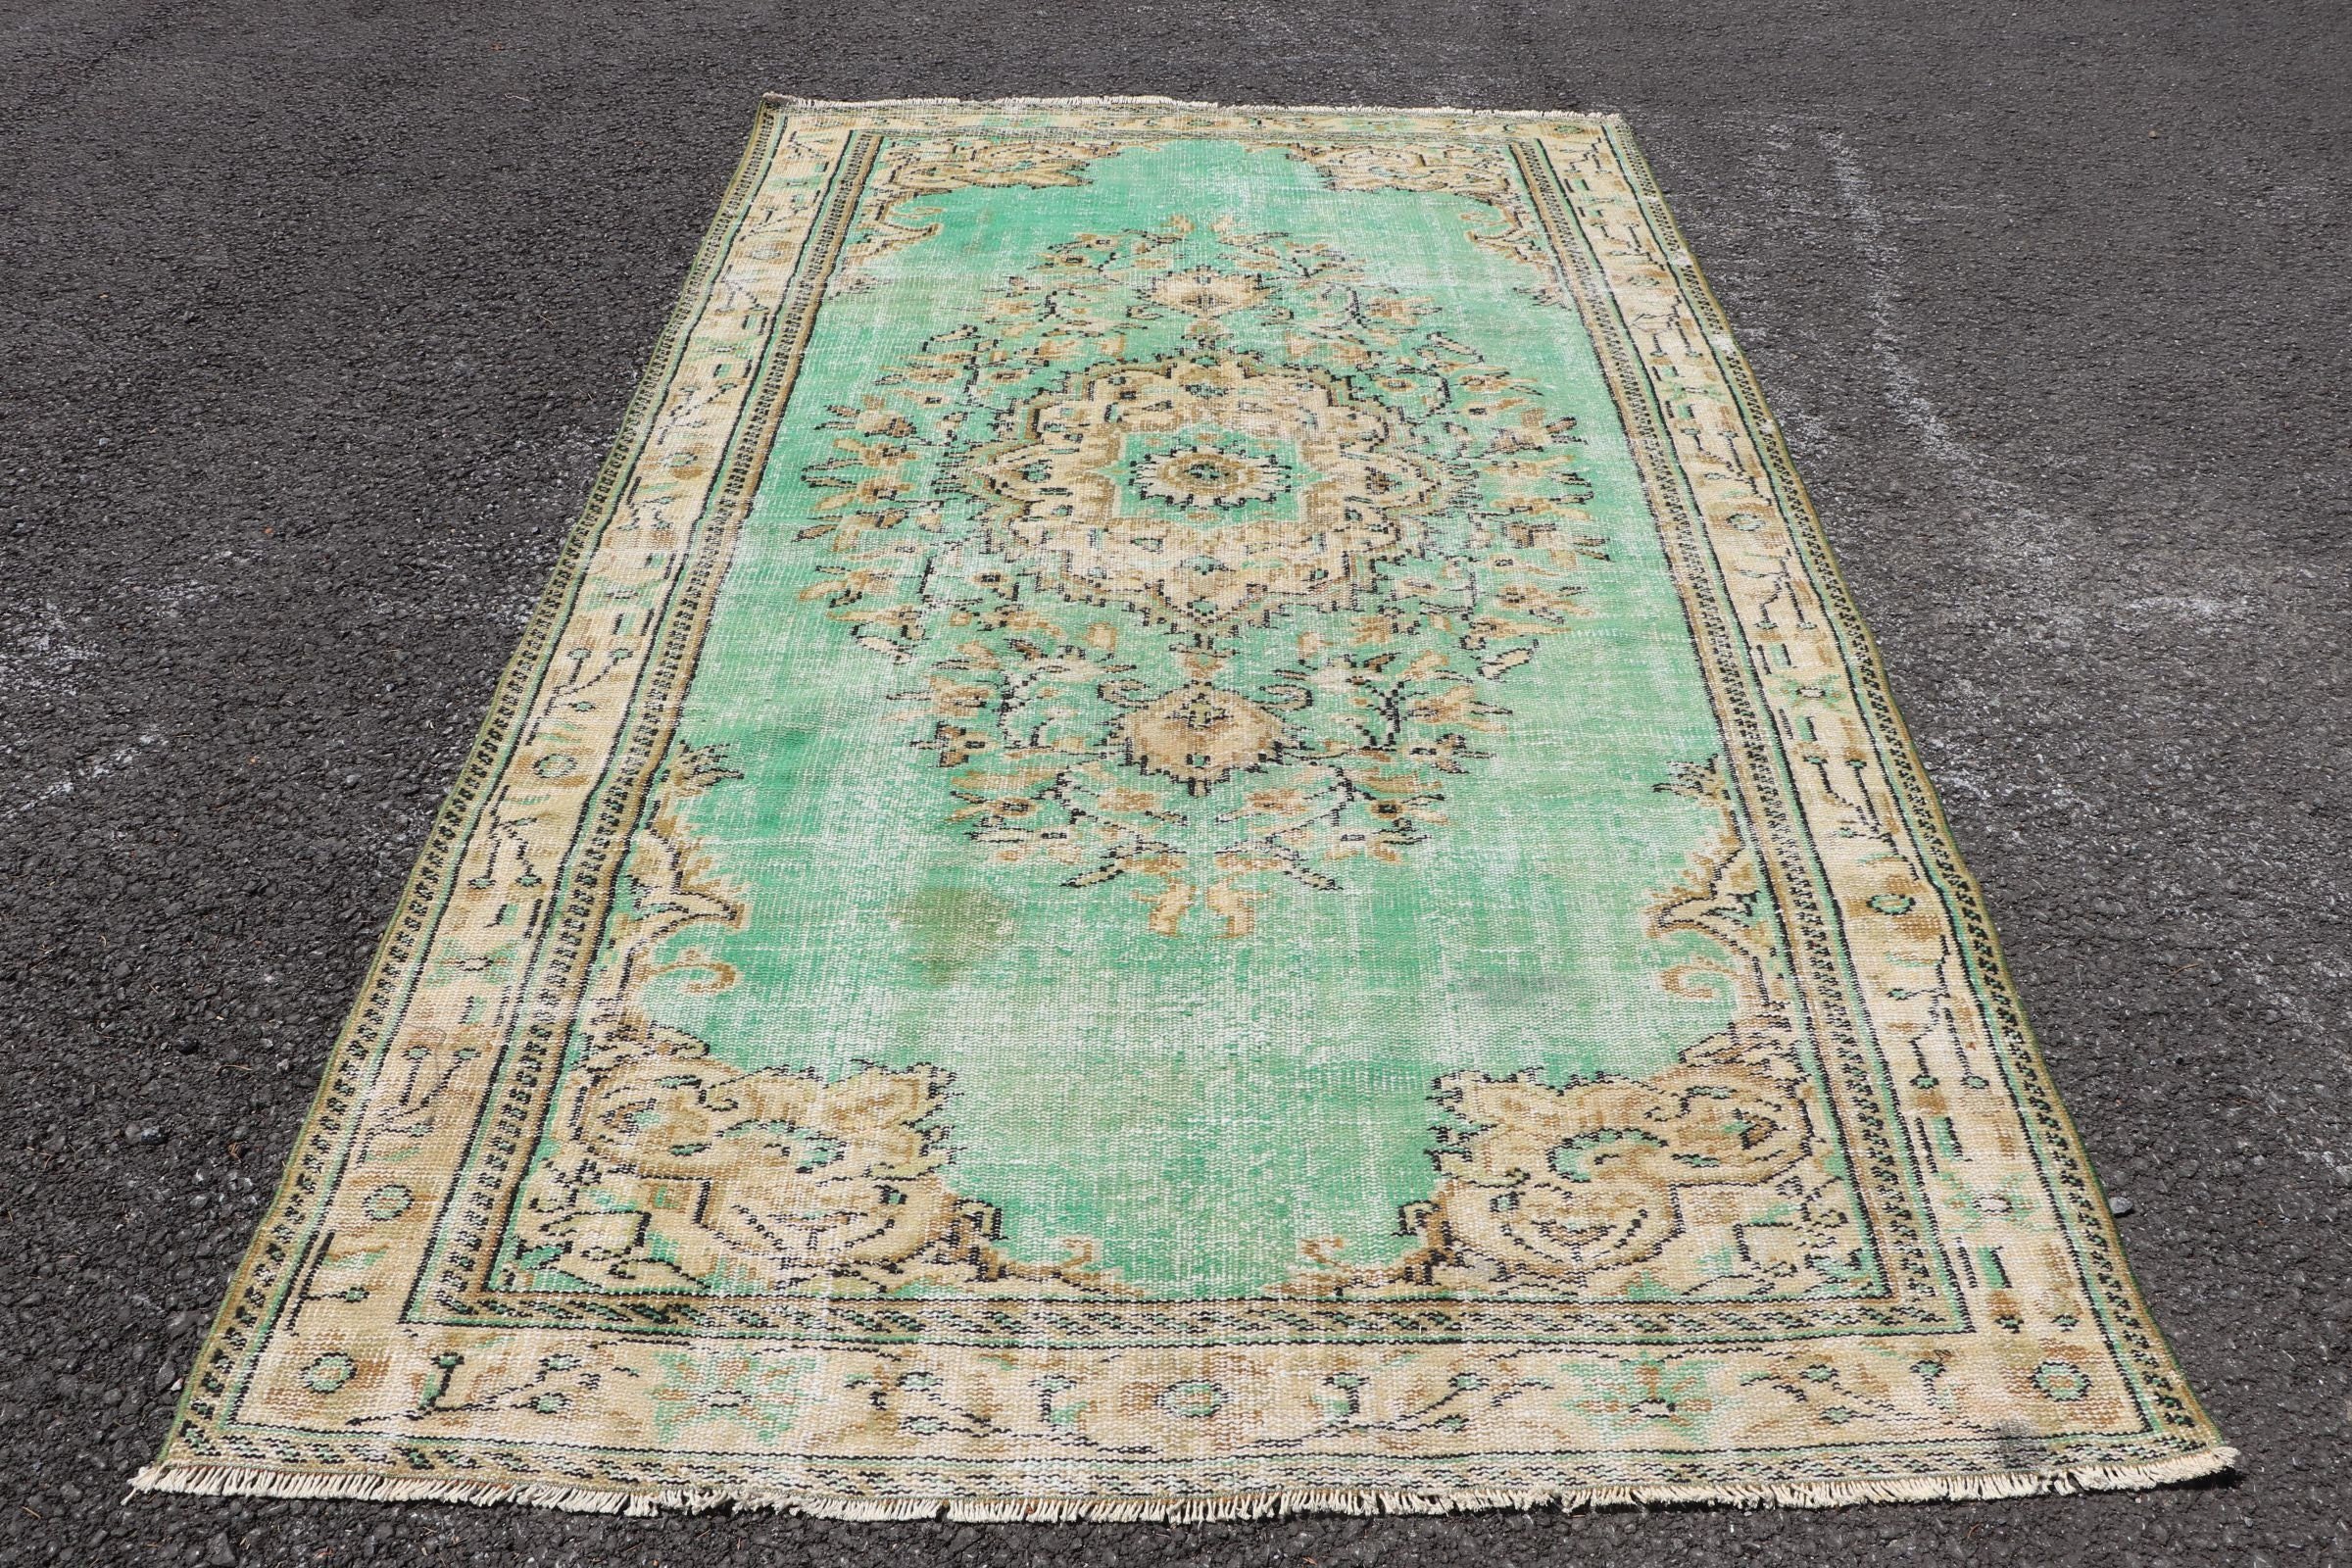 Turkish Rugs, Living Room Rugs, Vintage Rug, Wool Rugs, Green Home Decor Rug, Hand Woven Rug, Antique Rug, Salon Rug, 5.2x9.3 ft Large Rugs